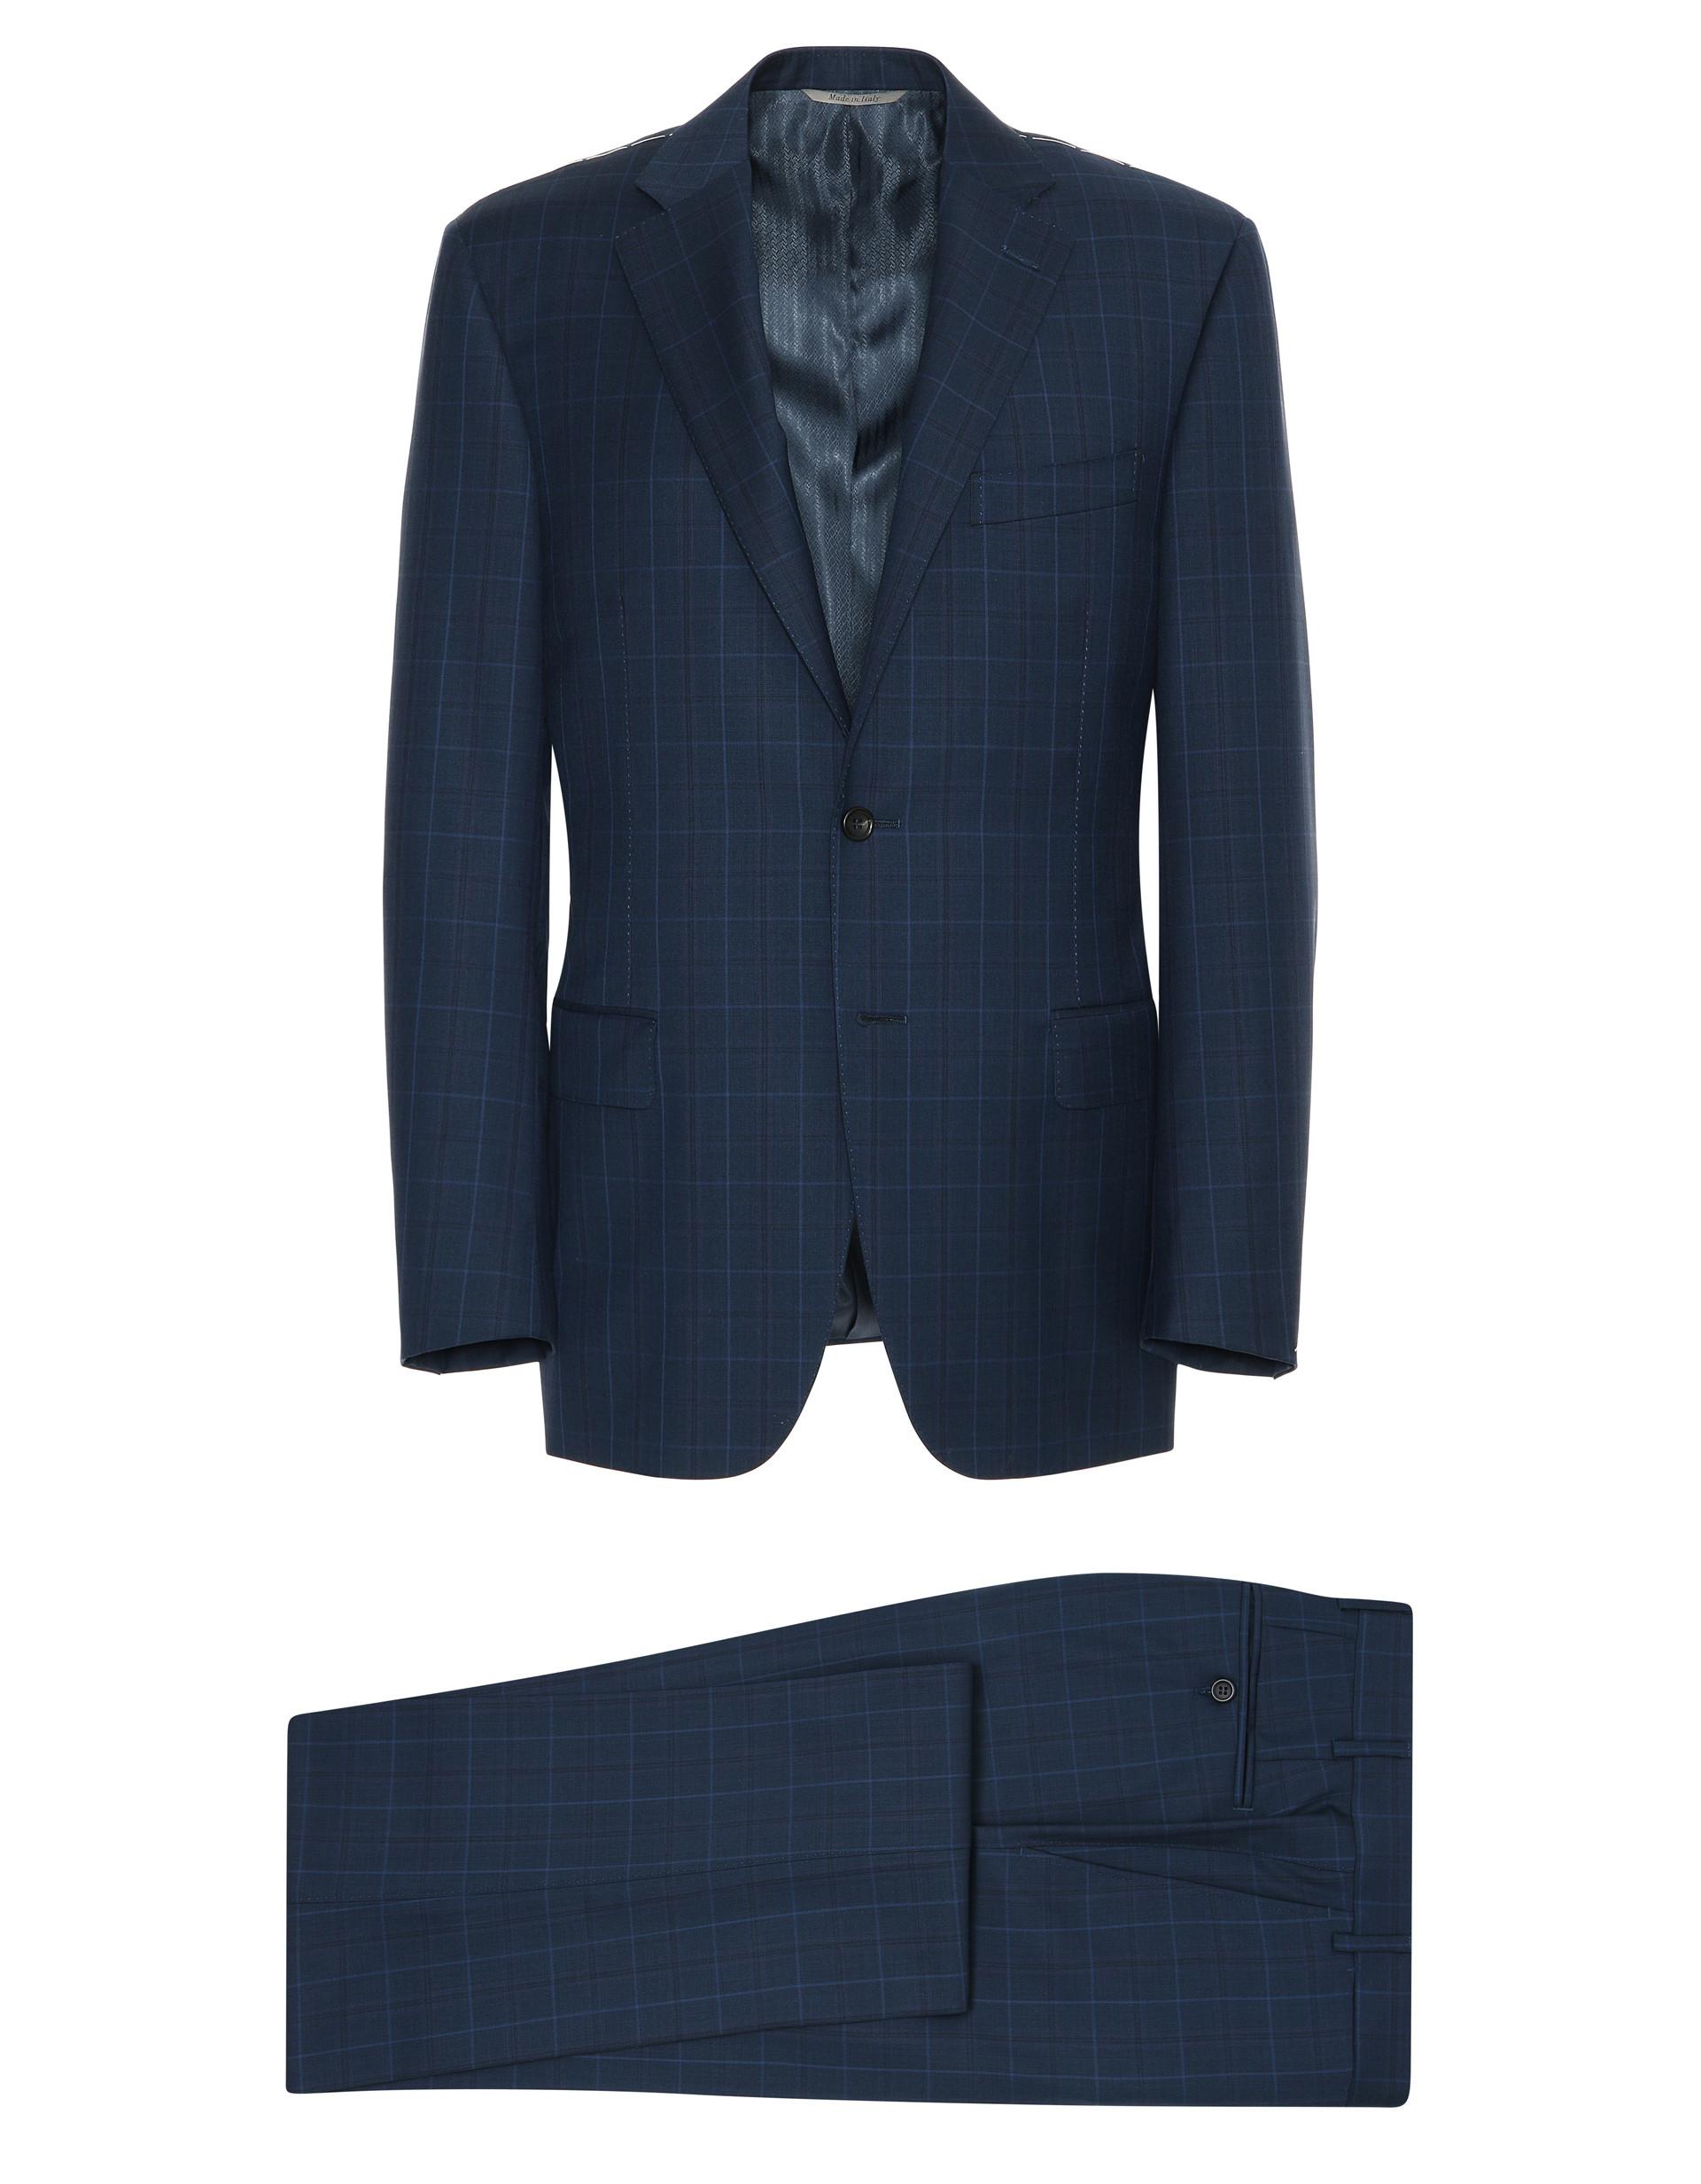 Canali Blue Super 150s Wool Siena Suit With Overcheck for Men - Save 30 ...